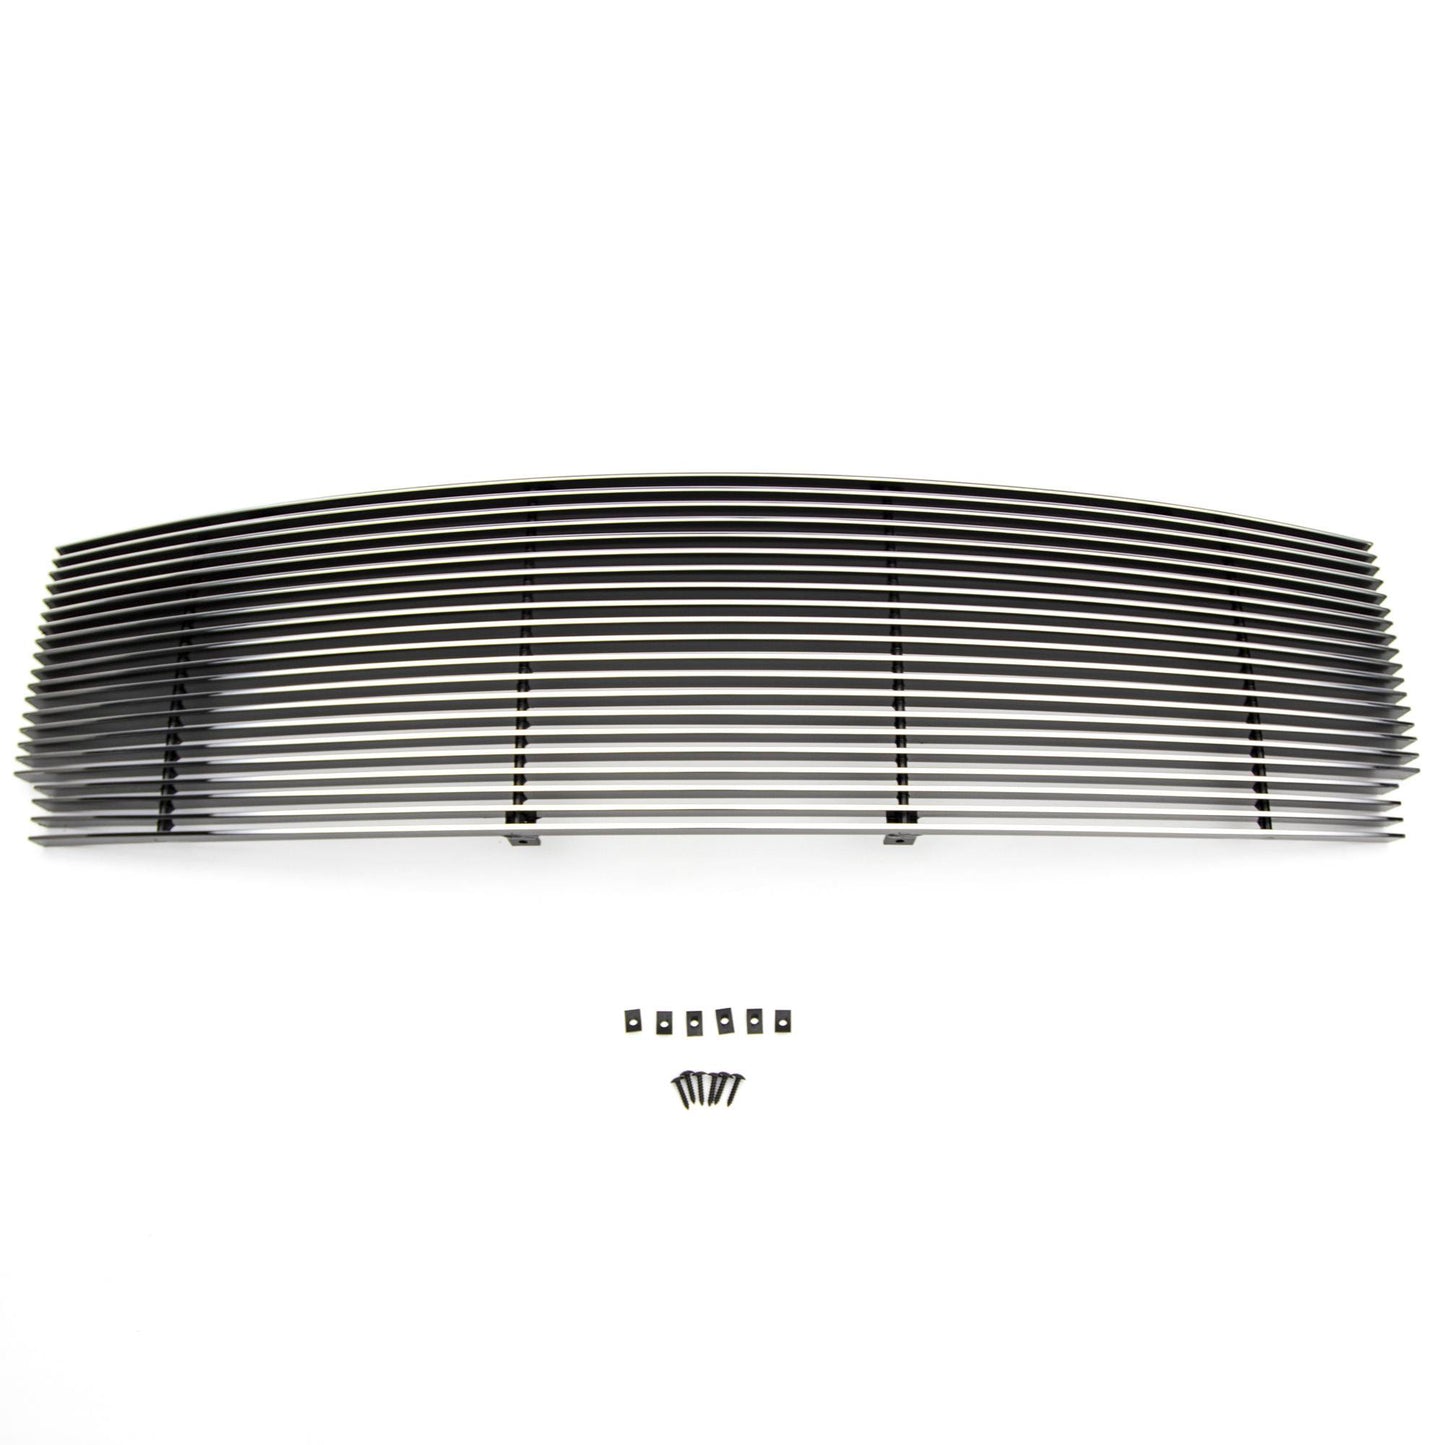 T-REX Grilles 20180 Polished Aluminum Horizontal Grille Fits 1999-2000 Cadillac Escalade